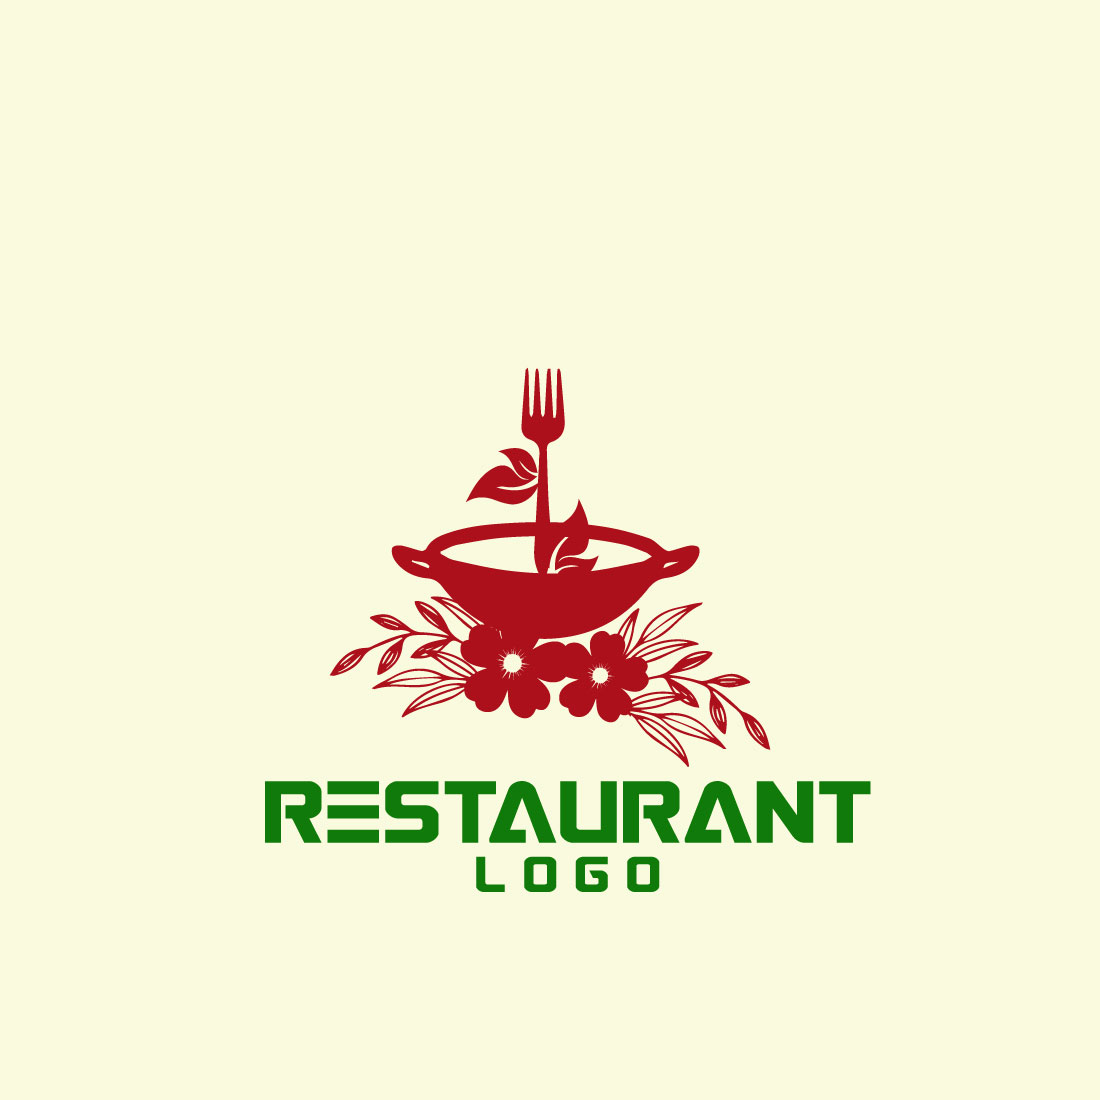 Free Chef's Table Logo cover image.